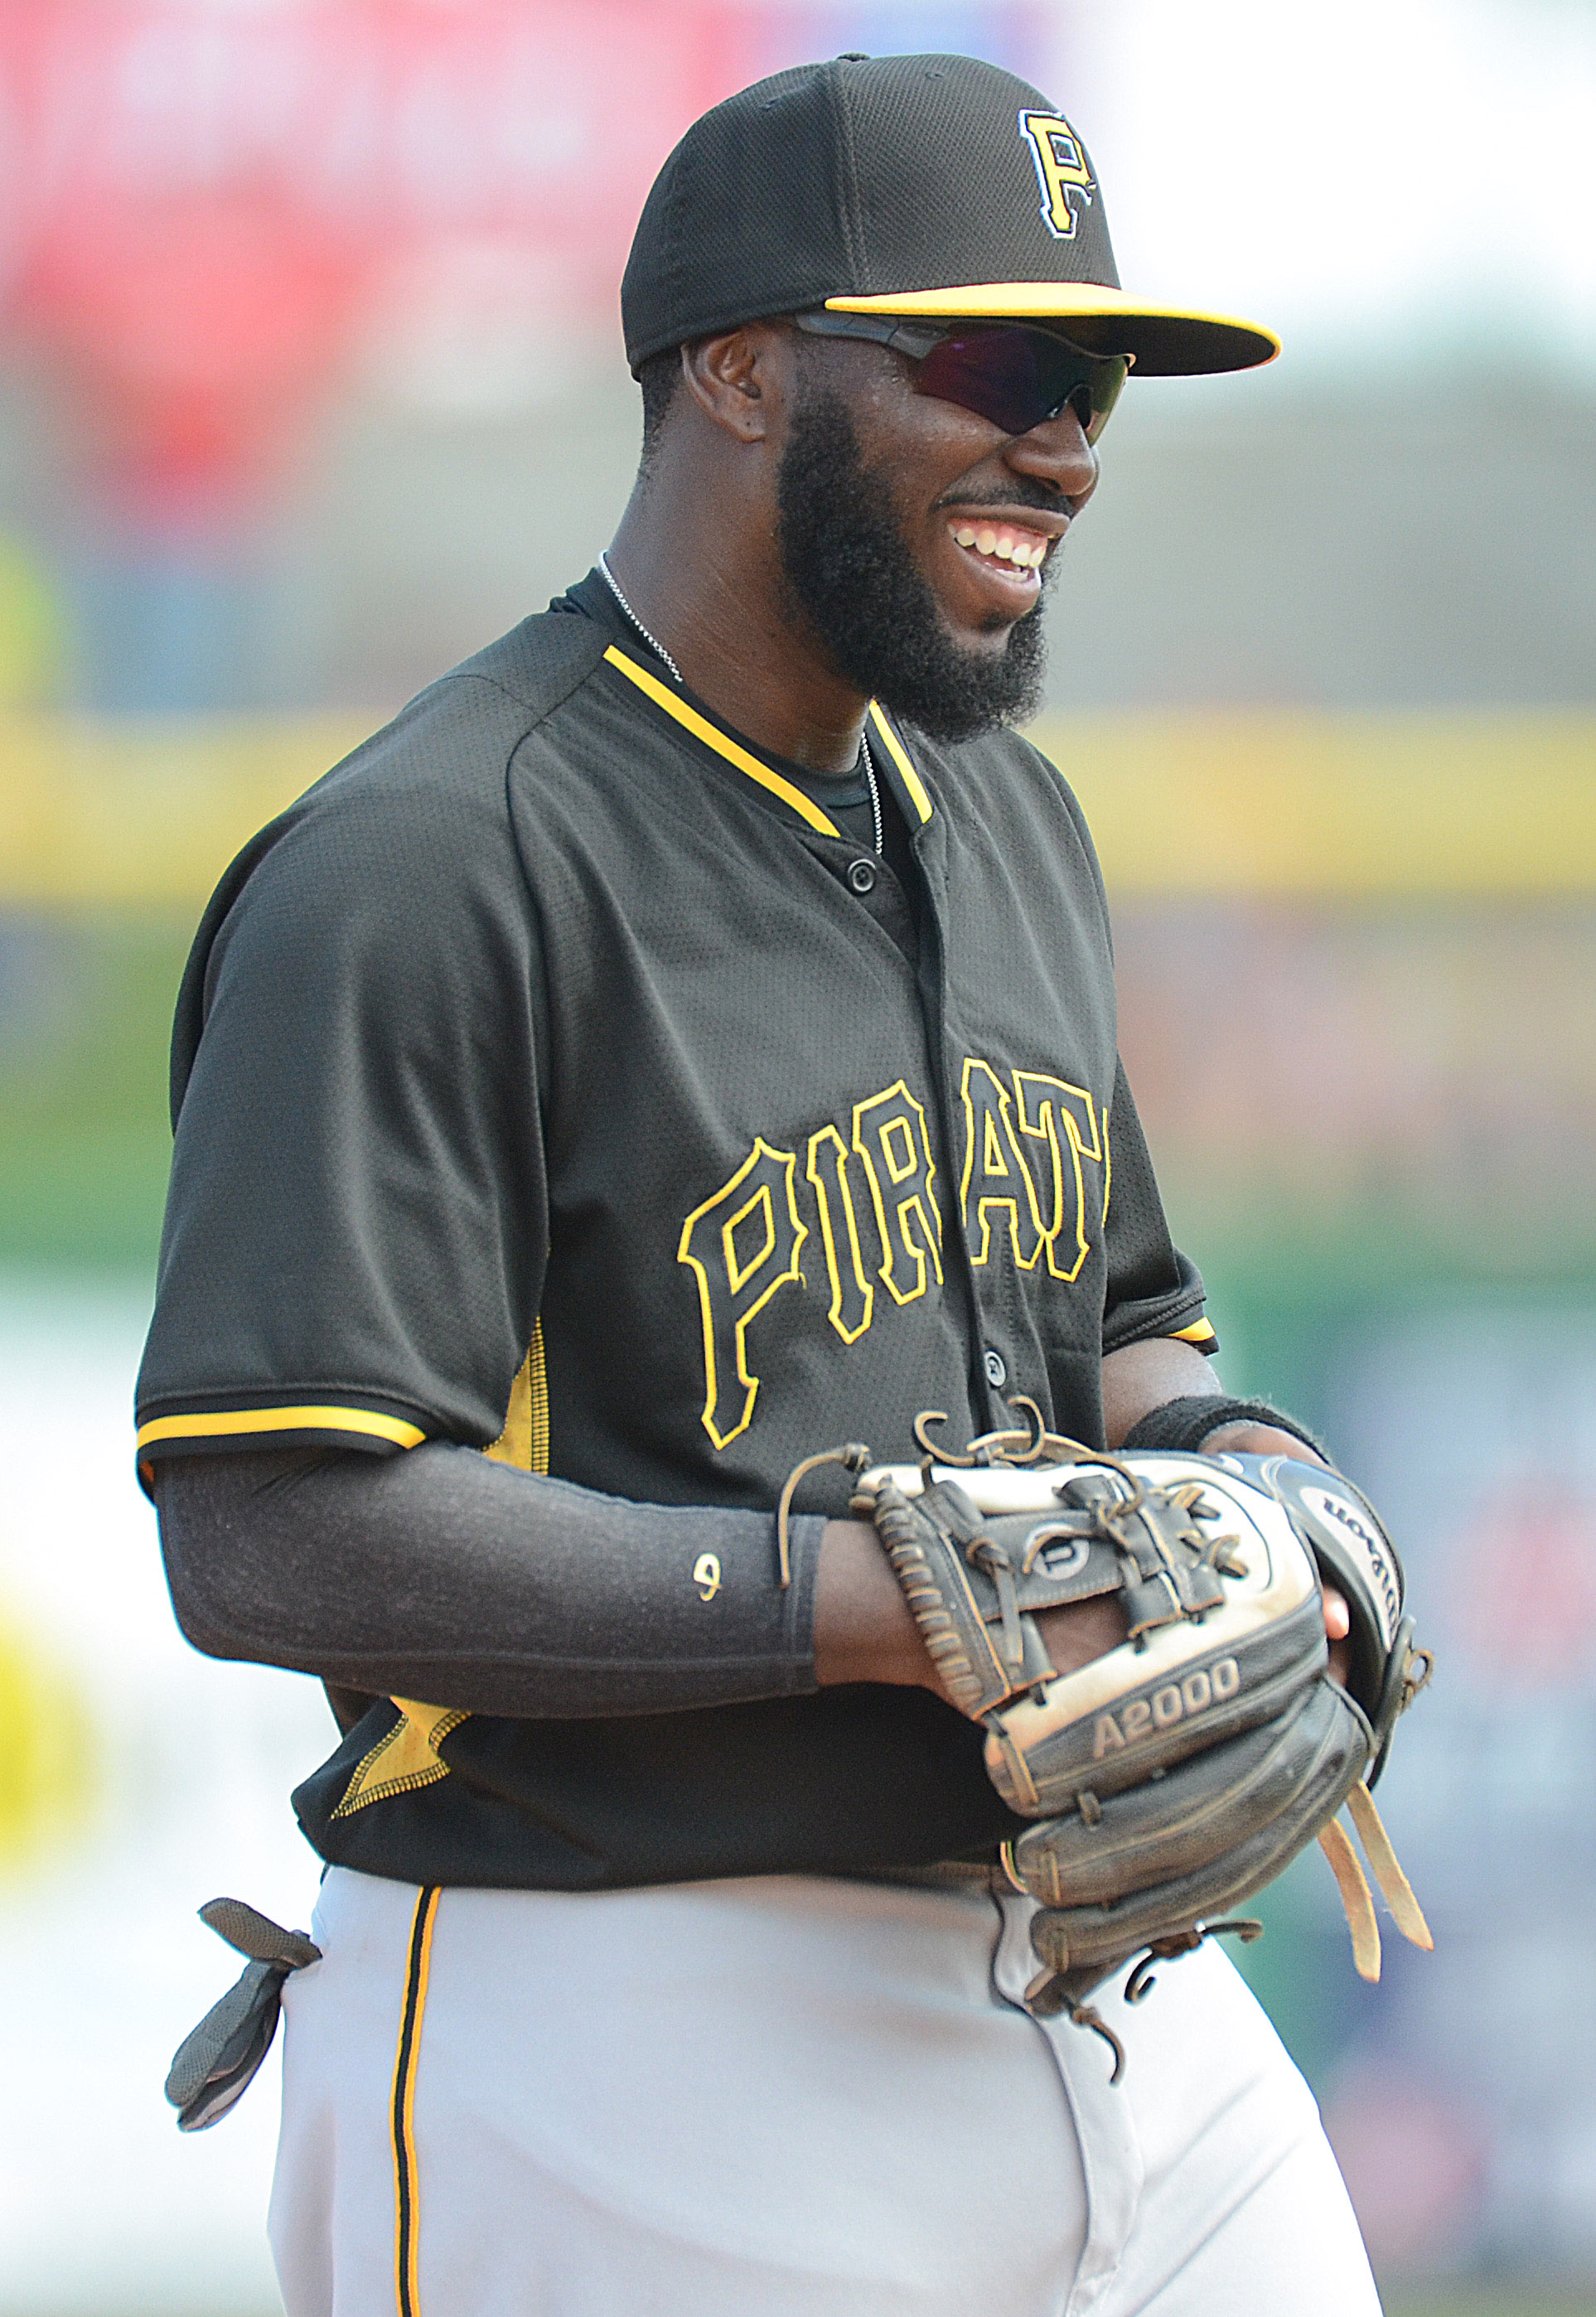 What to expect for the Texas Rangers after signing utility man Josh Harrison